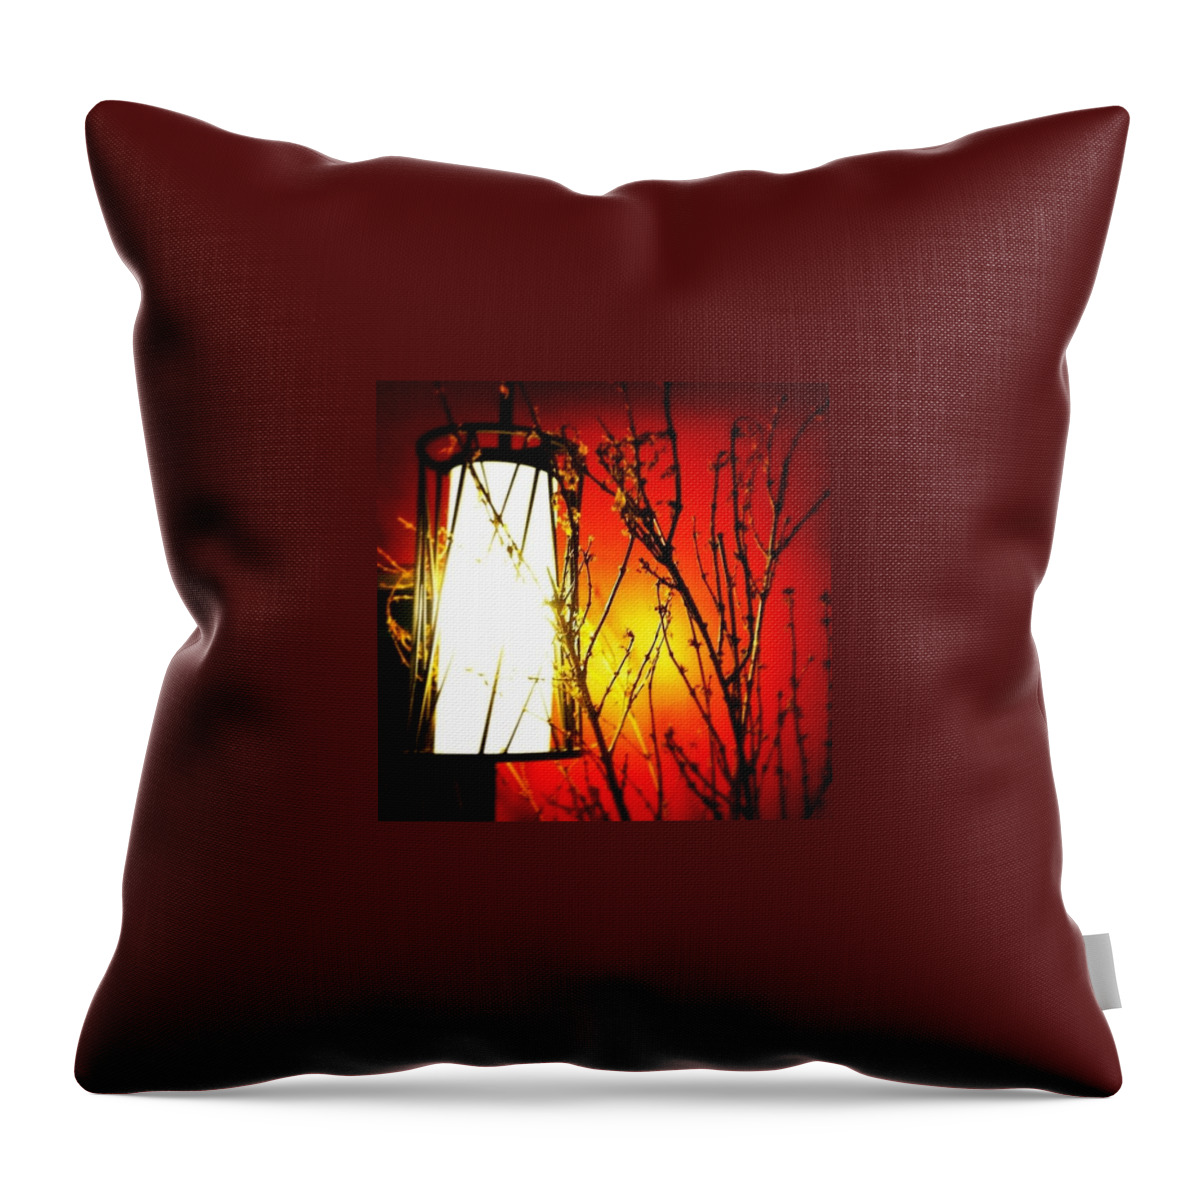 Light Throw Pillow featuring the photograph Asian Mood by Joan McCool